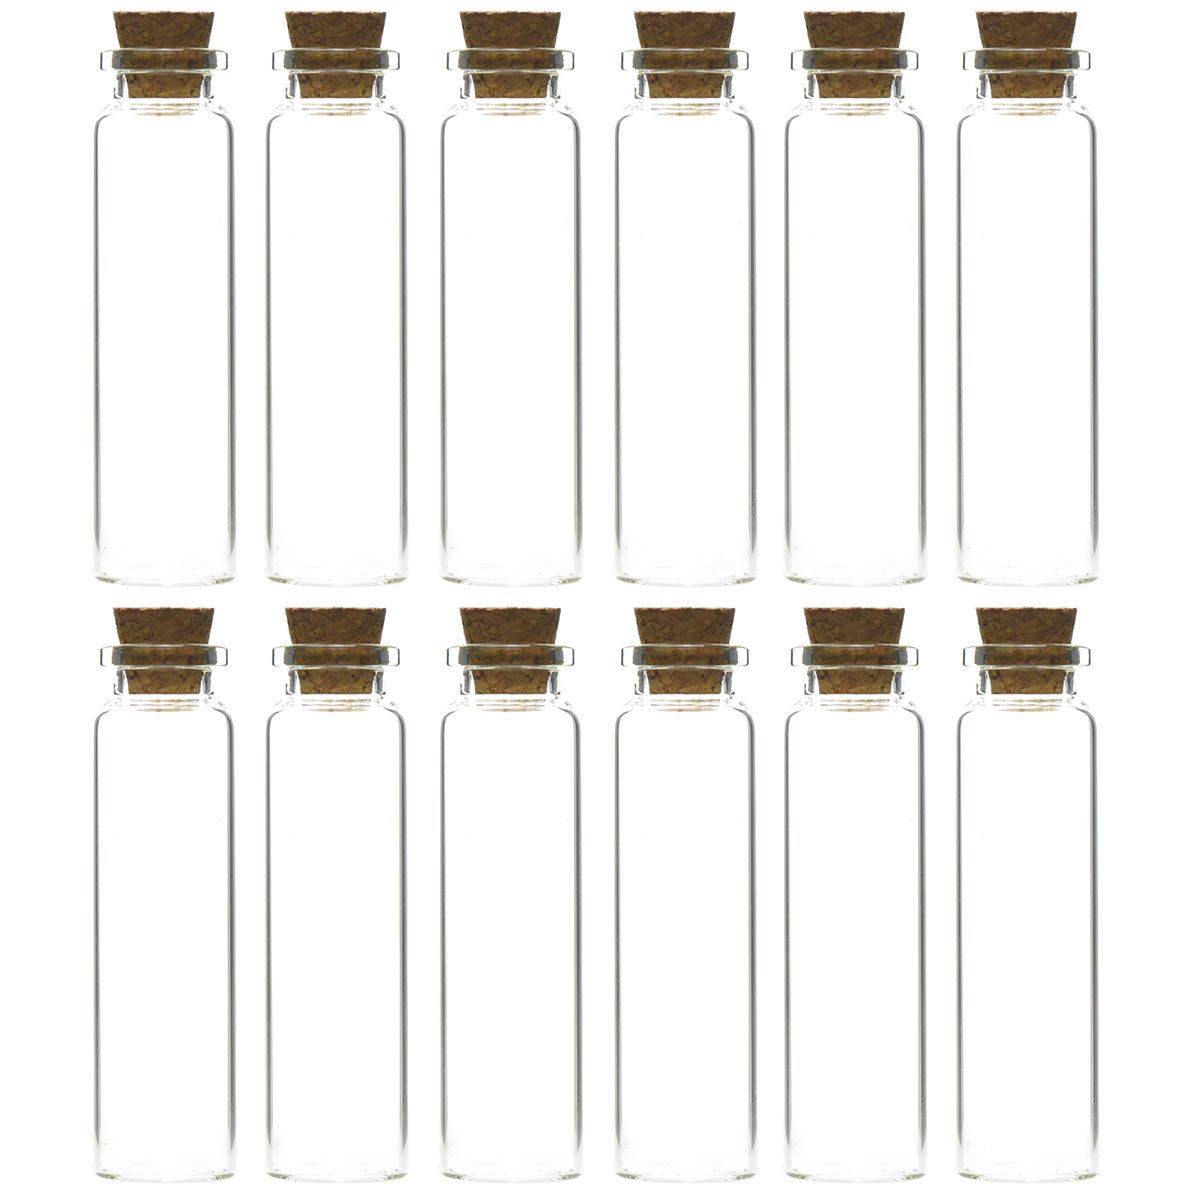 Mini Transparent Glass Bottles,Jars with Cork Stoppers for Scents, Oils, Spices, Collections, Wedding, Jewelry, Message, Party Favors etc